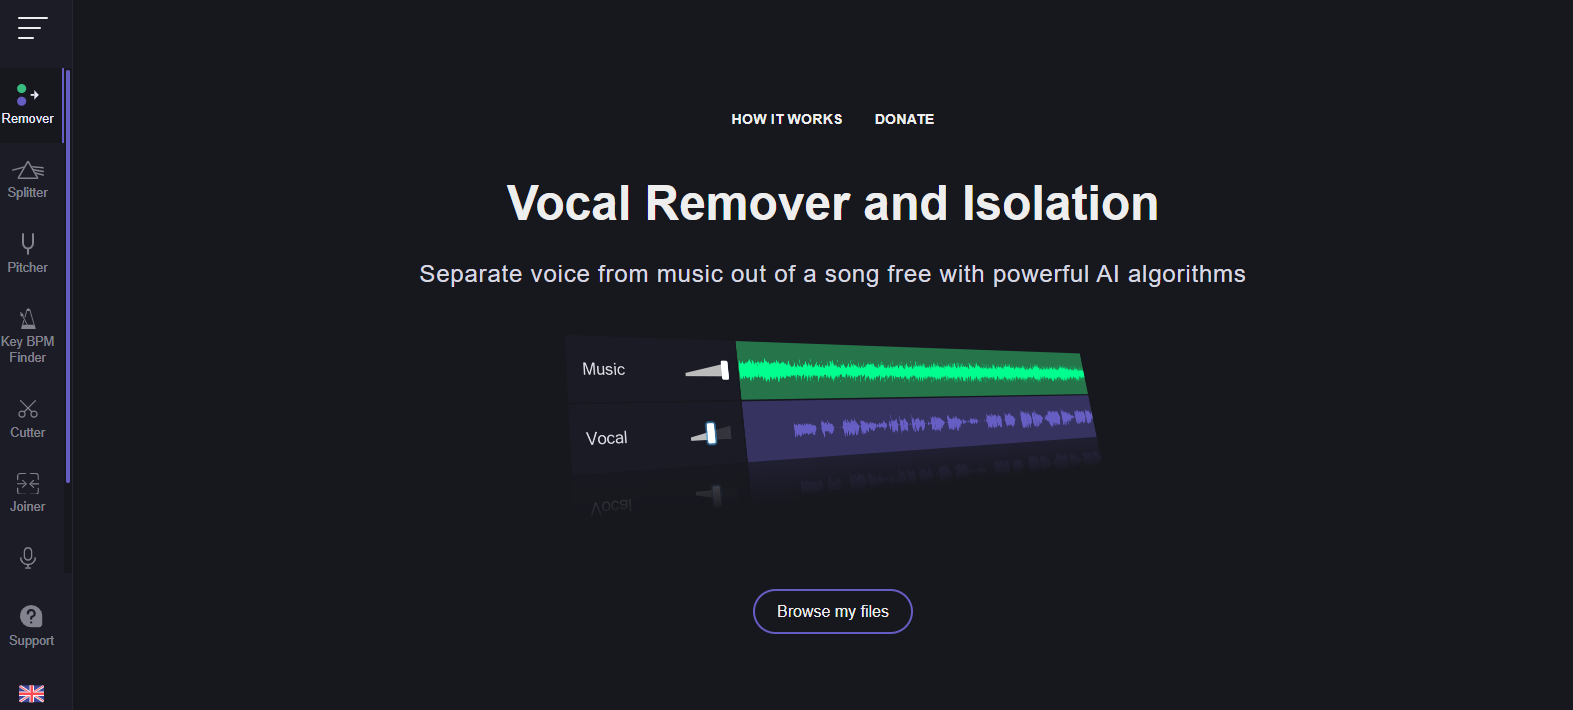 How to Use Vocal Remover and Isolation